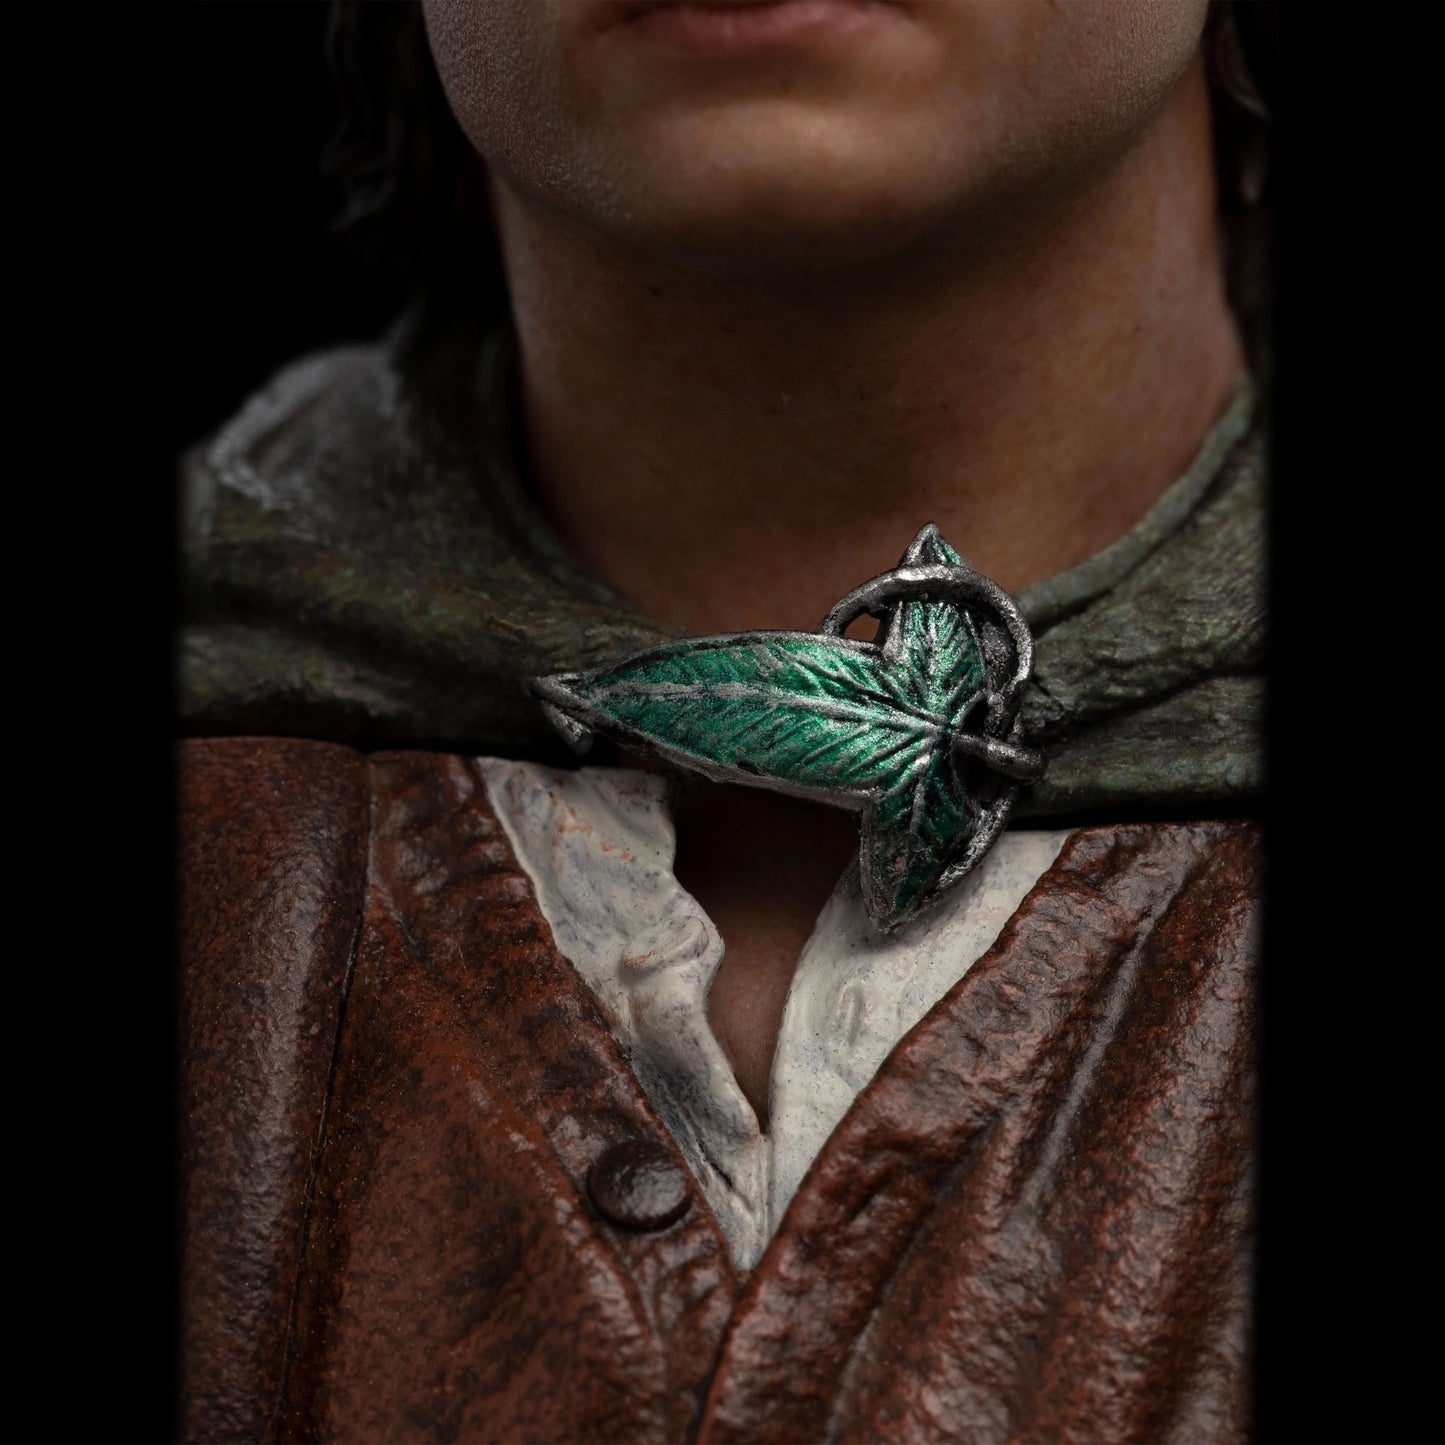 Frodo Baggins, Ringbearer (Lord of the Rings) 1:6 Scale Statue by Weta Workshop